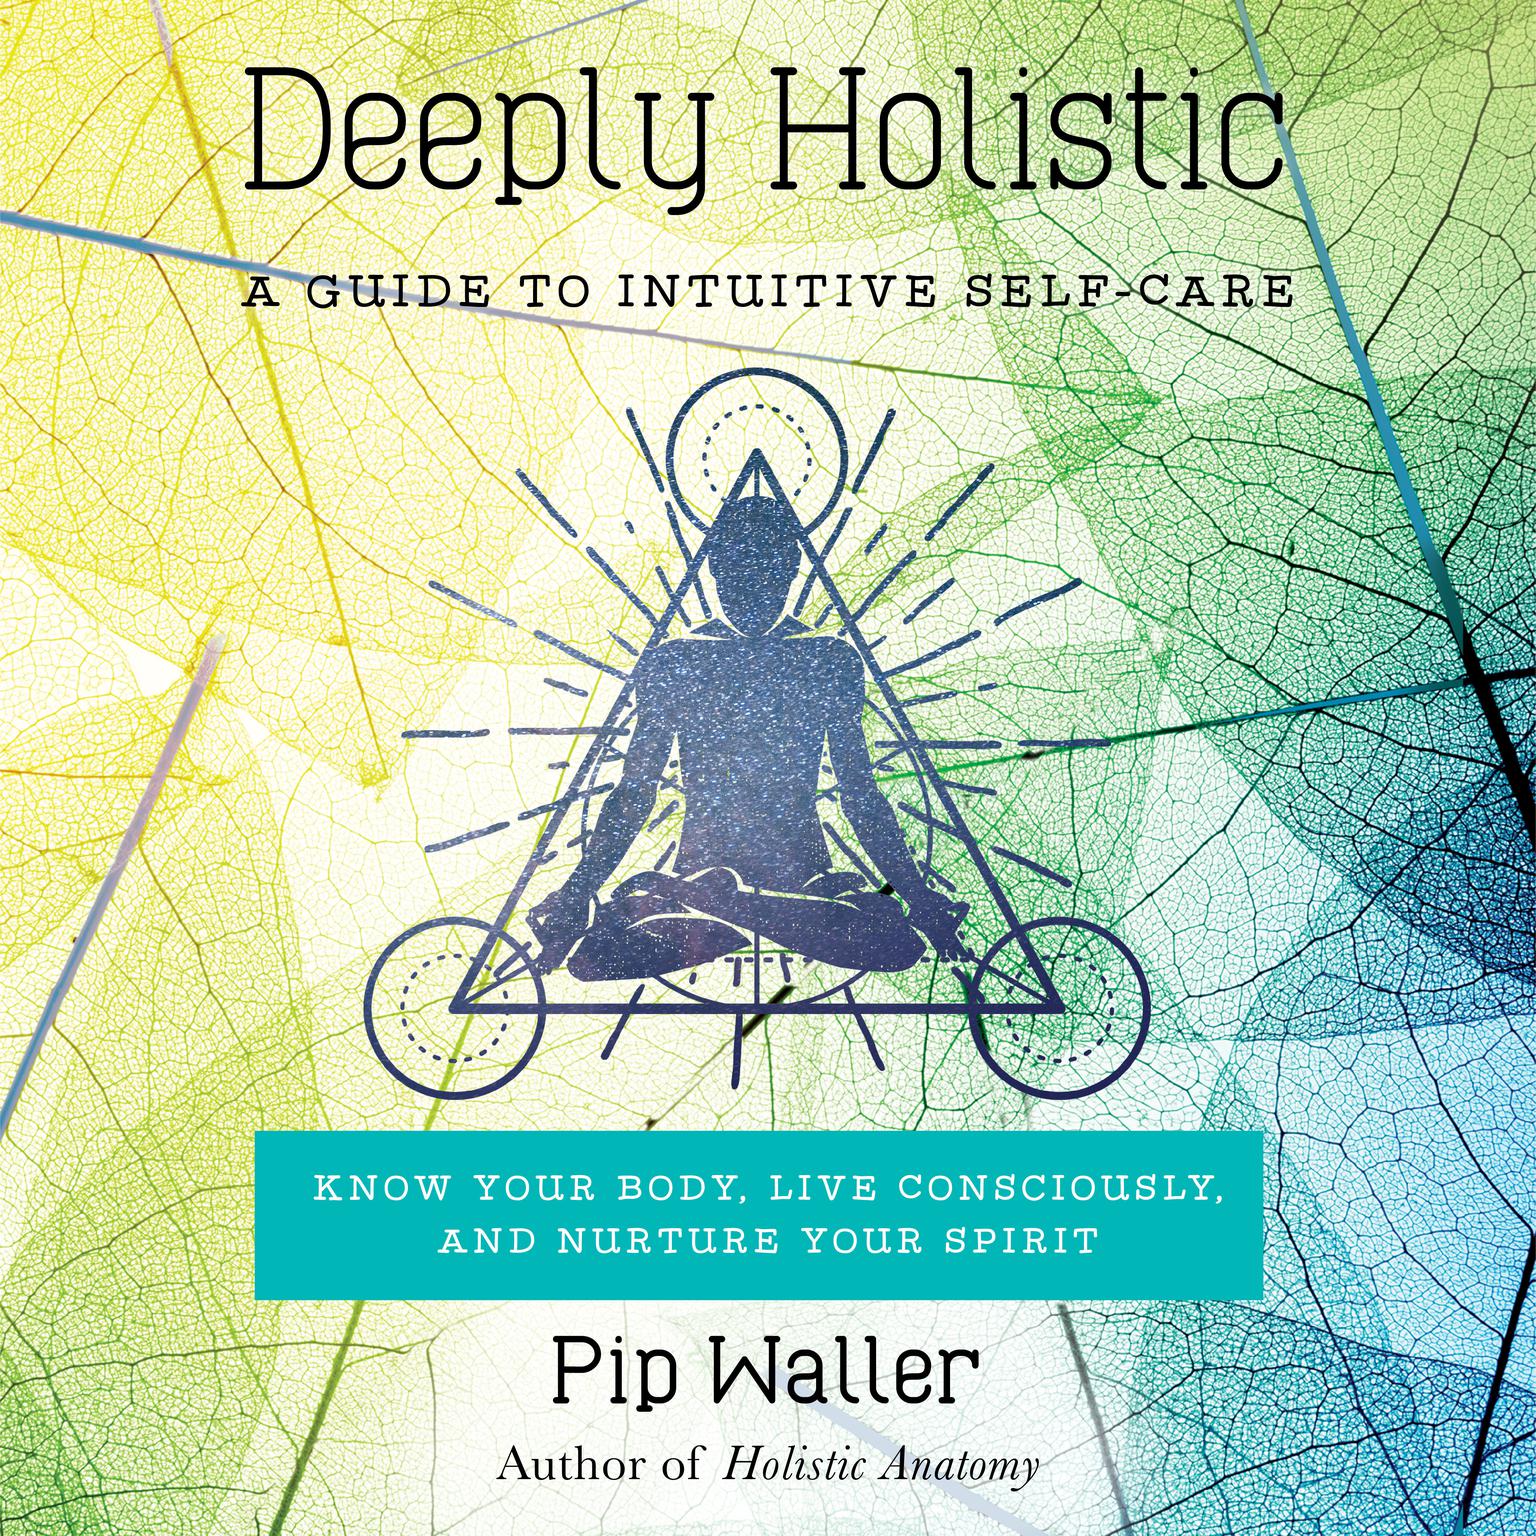 Deeply Holistic: A Guide to Intuitive Self-Care: Know Your Body, Live Consciously, and Nurture Yo ur Spirit Audiobook, by Pip Waller